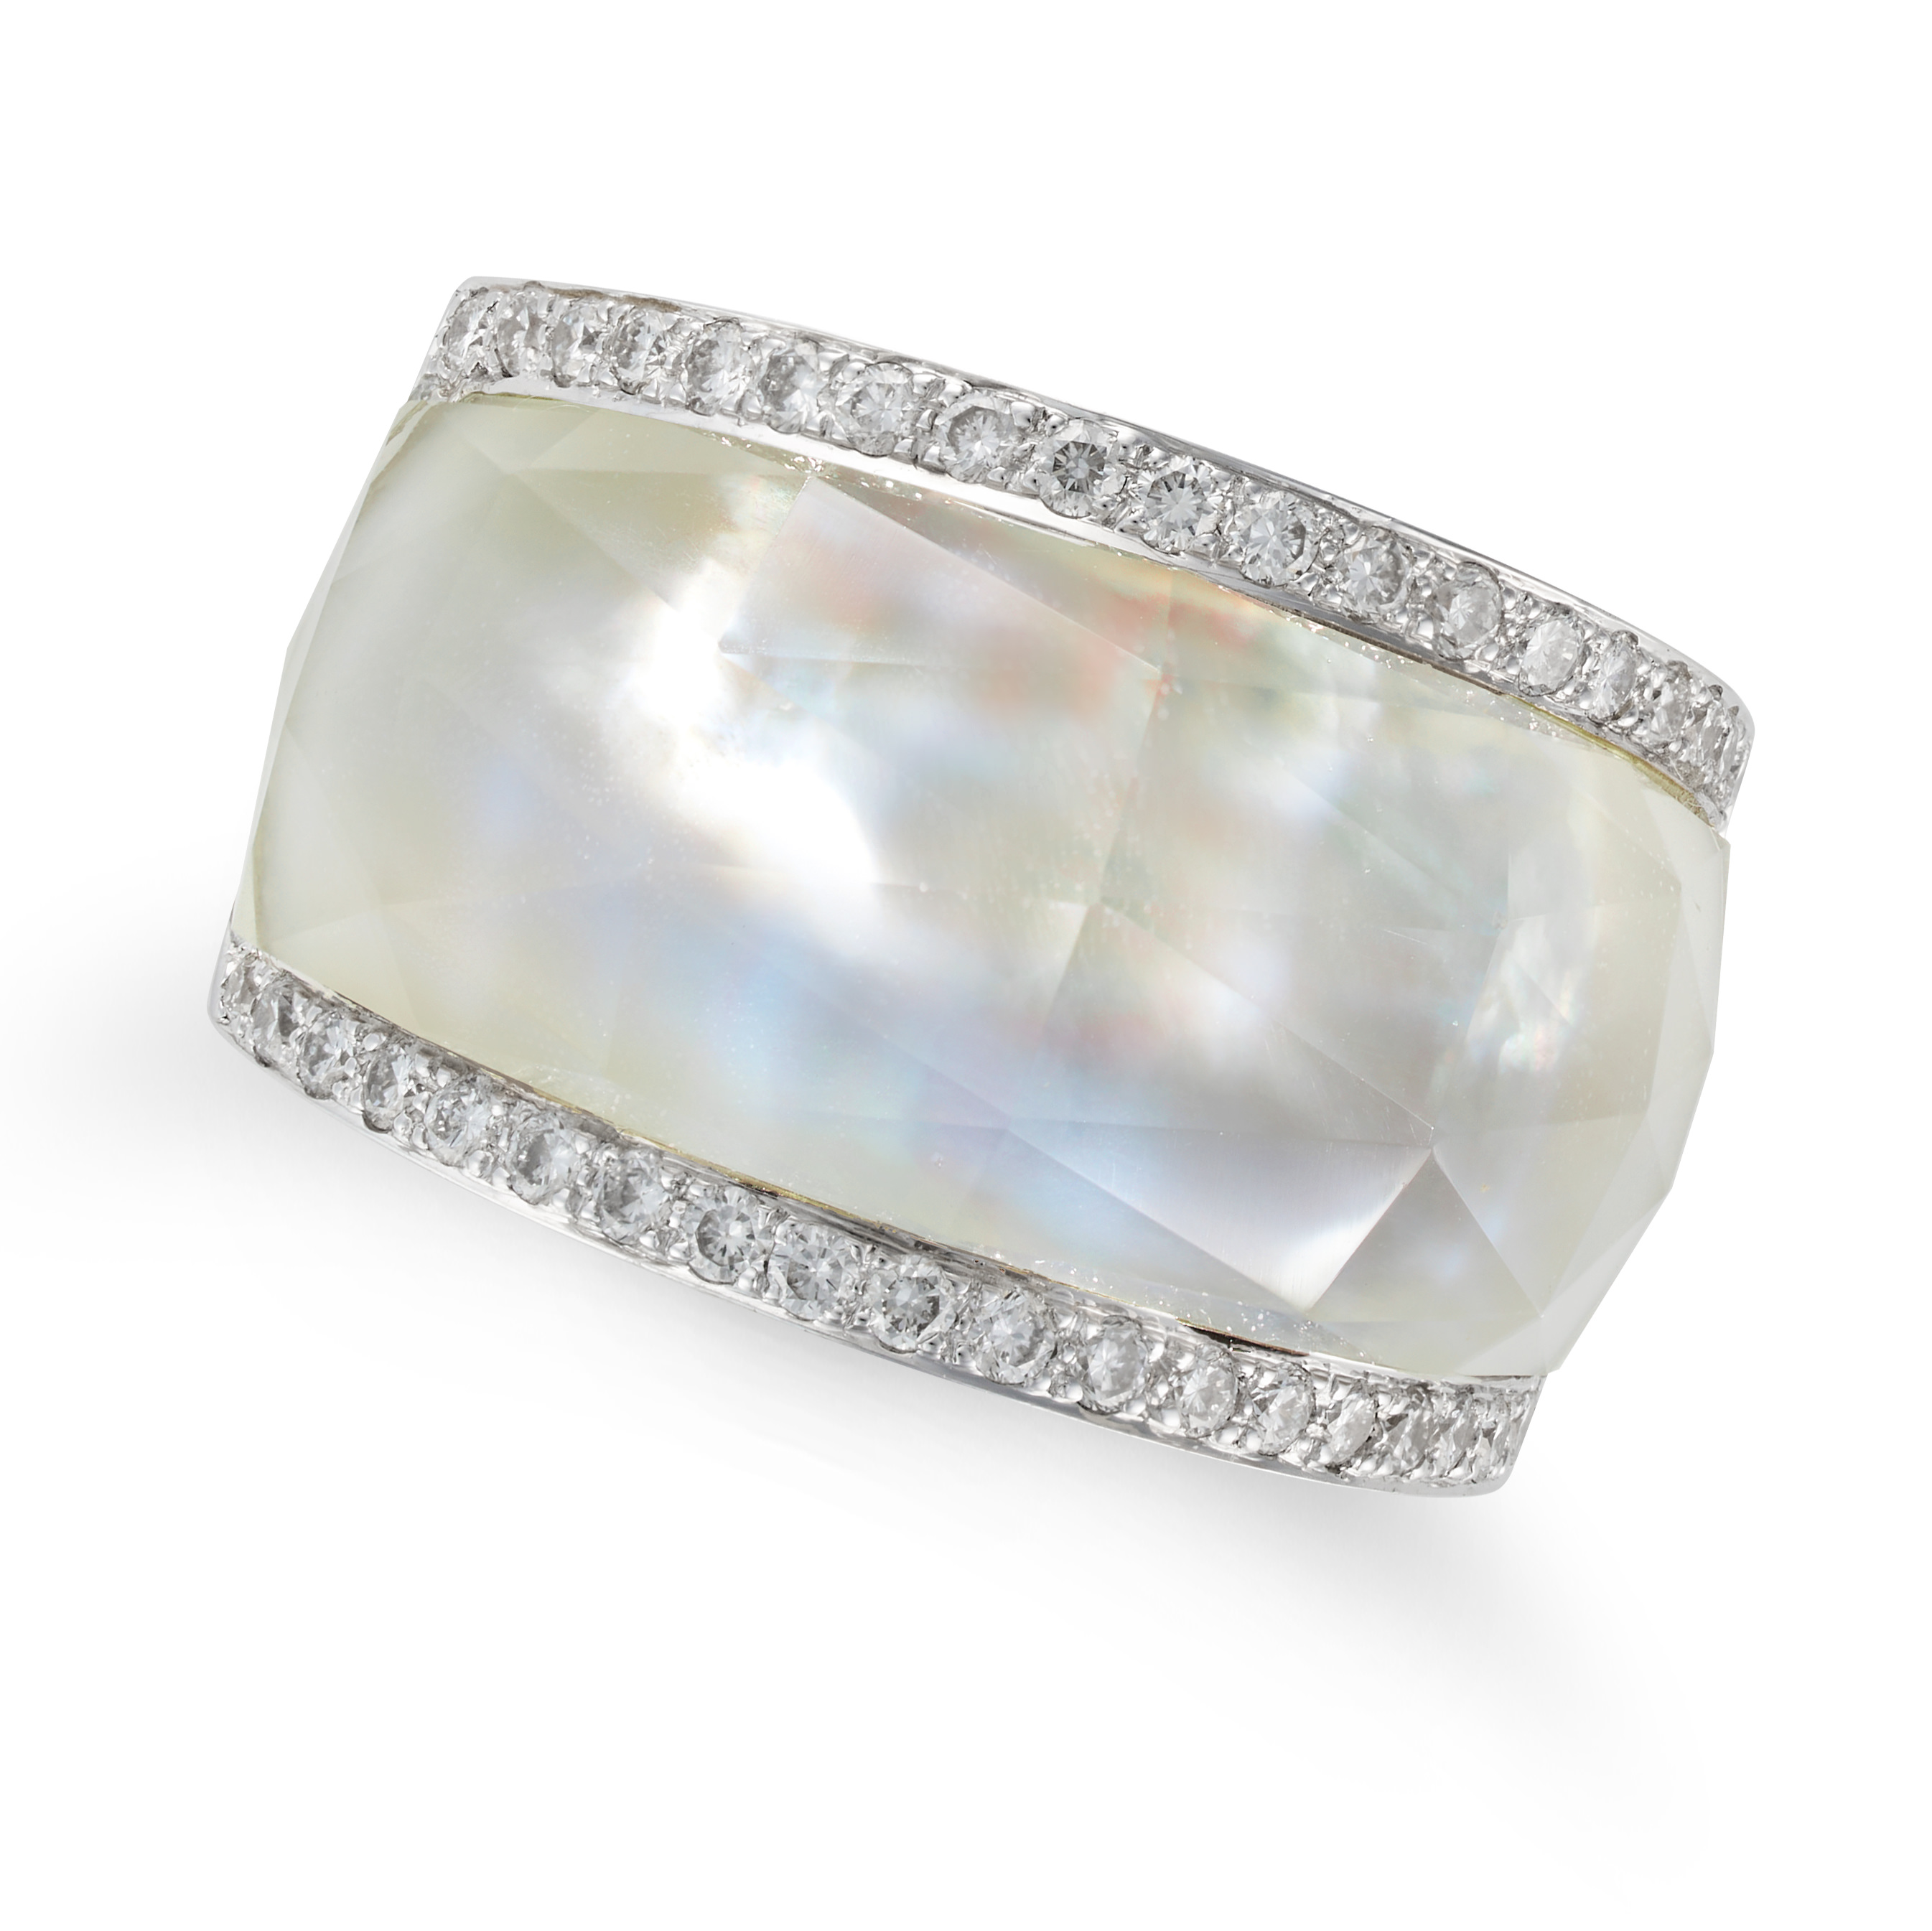 STEPHEN WEBSTER, A MOTHER OF PEARL, ROCK CRYSTAL AND DIAMOND CRYSTAL HAZE RING in 18ct white gold...